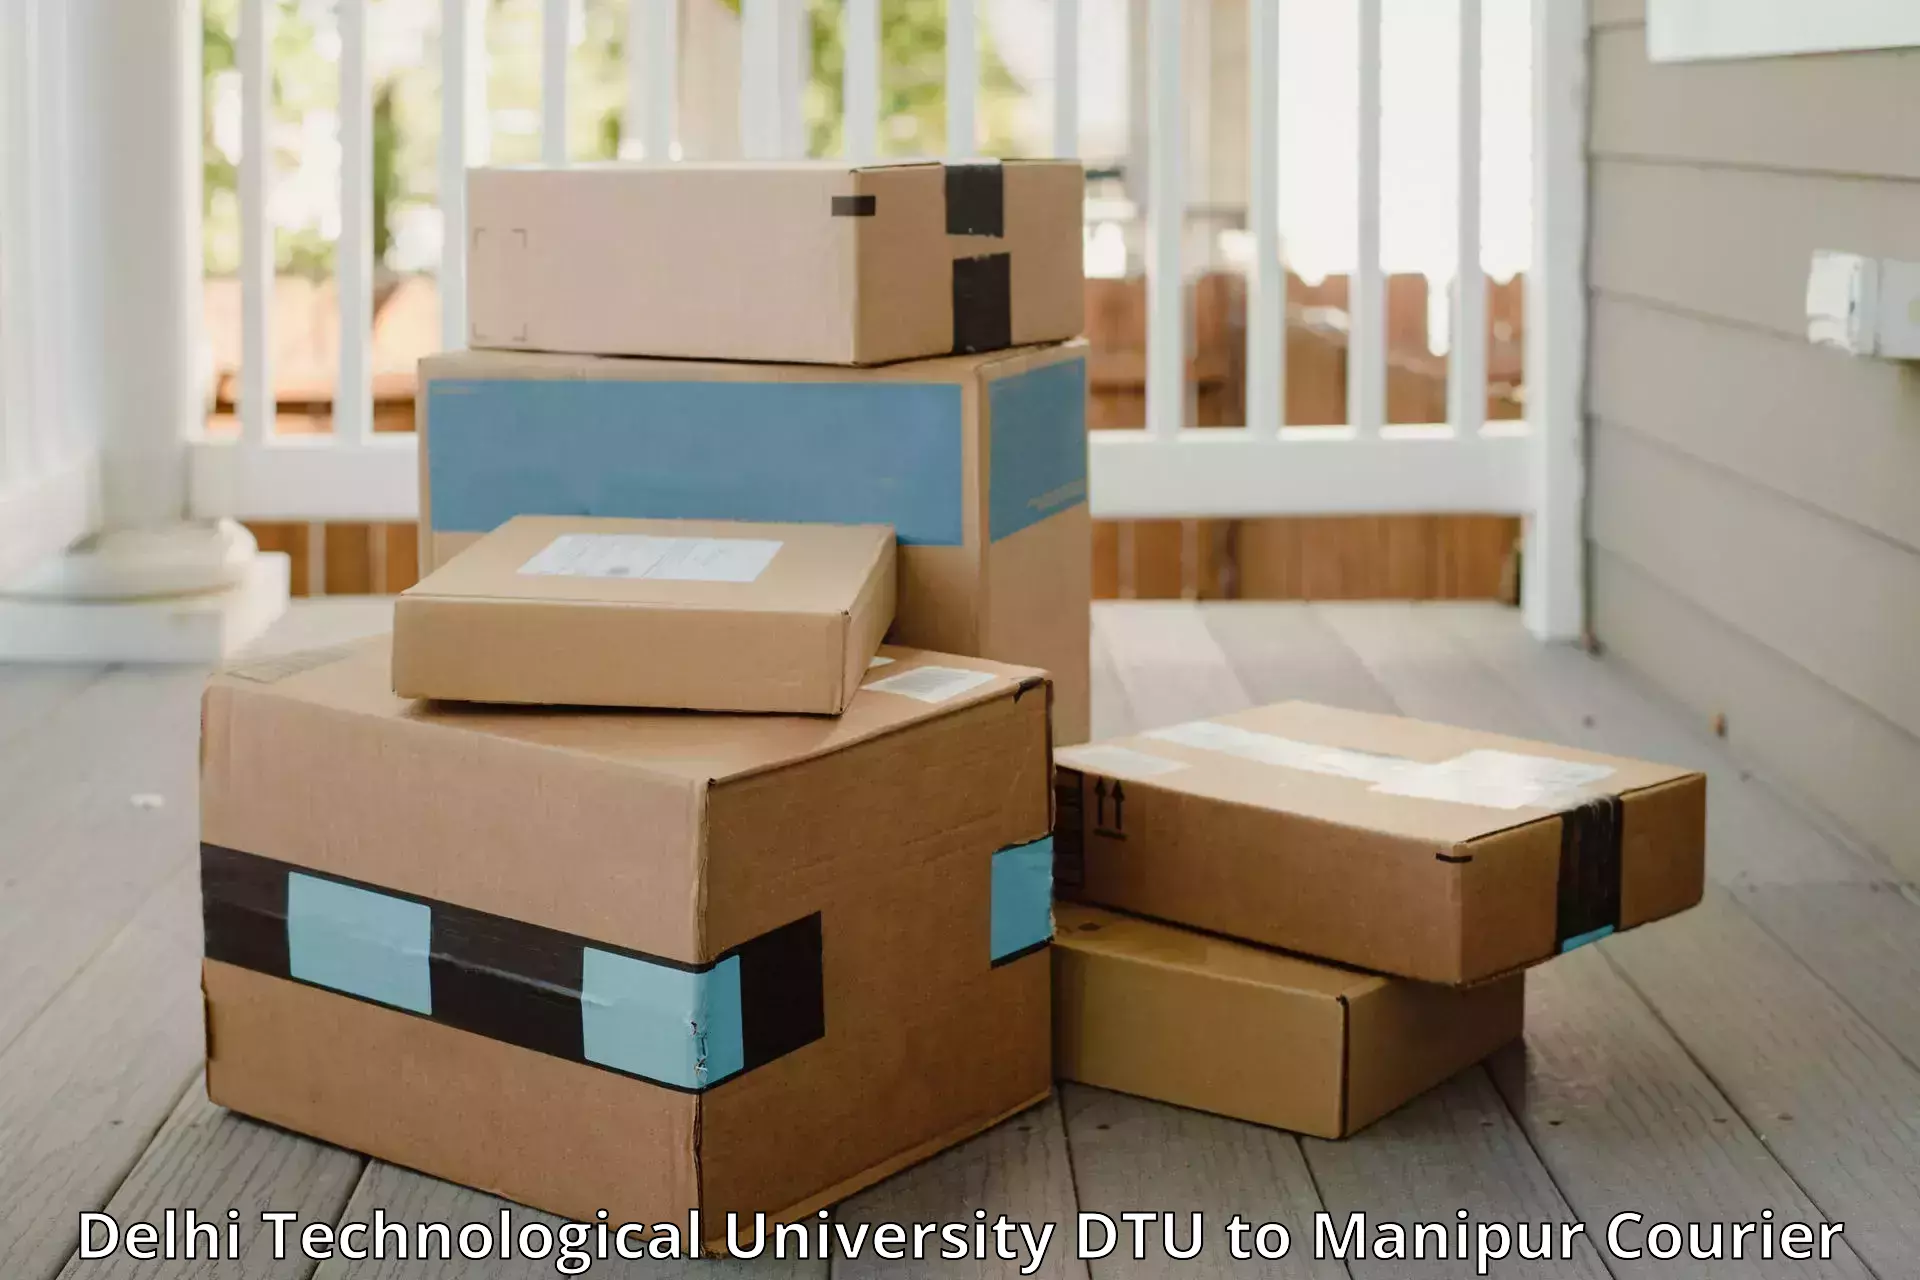 Suburban luggage delivery Delhi Technological University DTU to Manipur